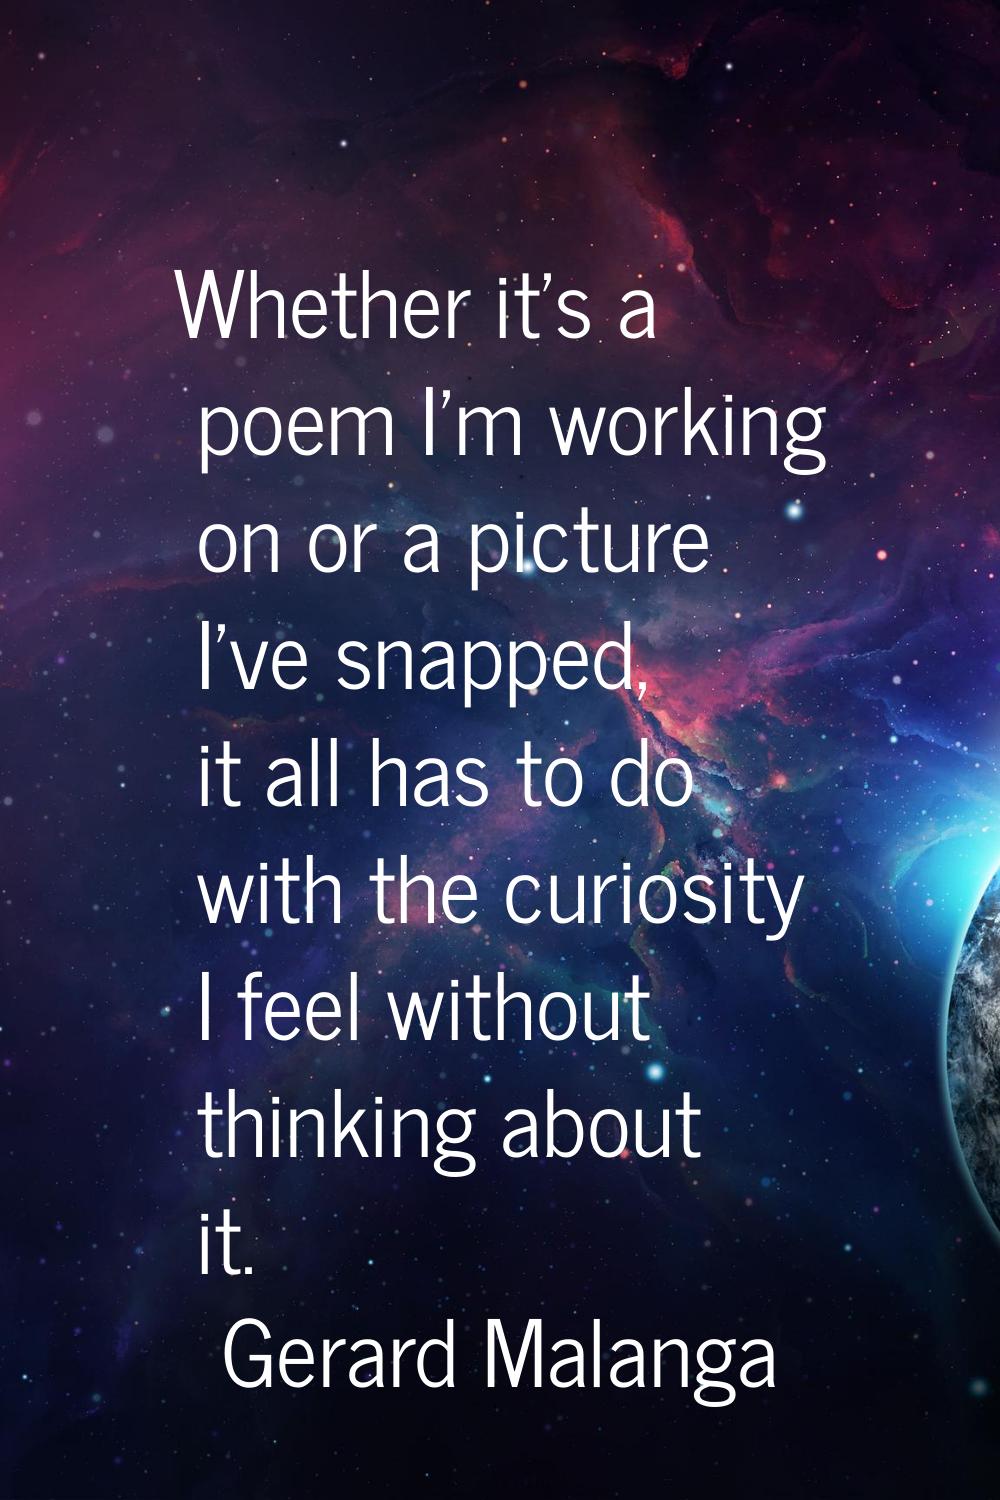 Whether it's a poem I'm working on or a picture I've snapped, it all has to do with the curiosity I